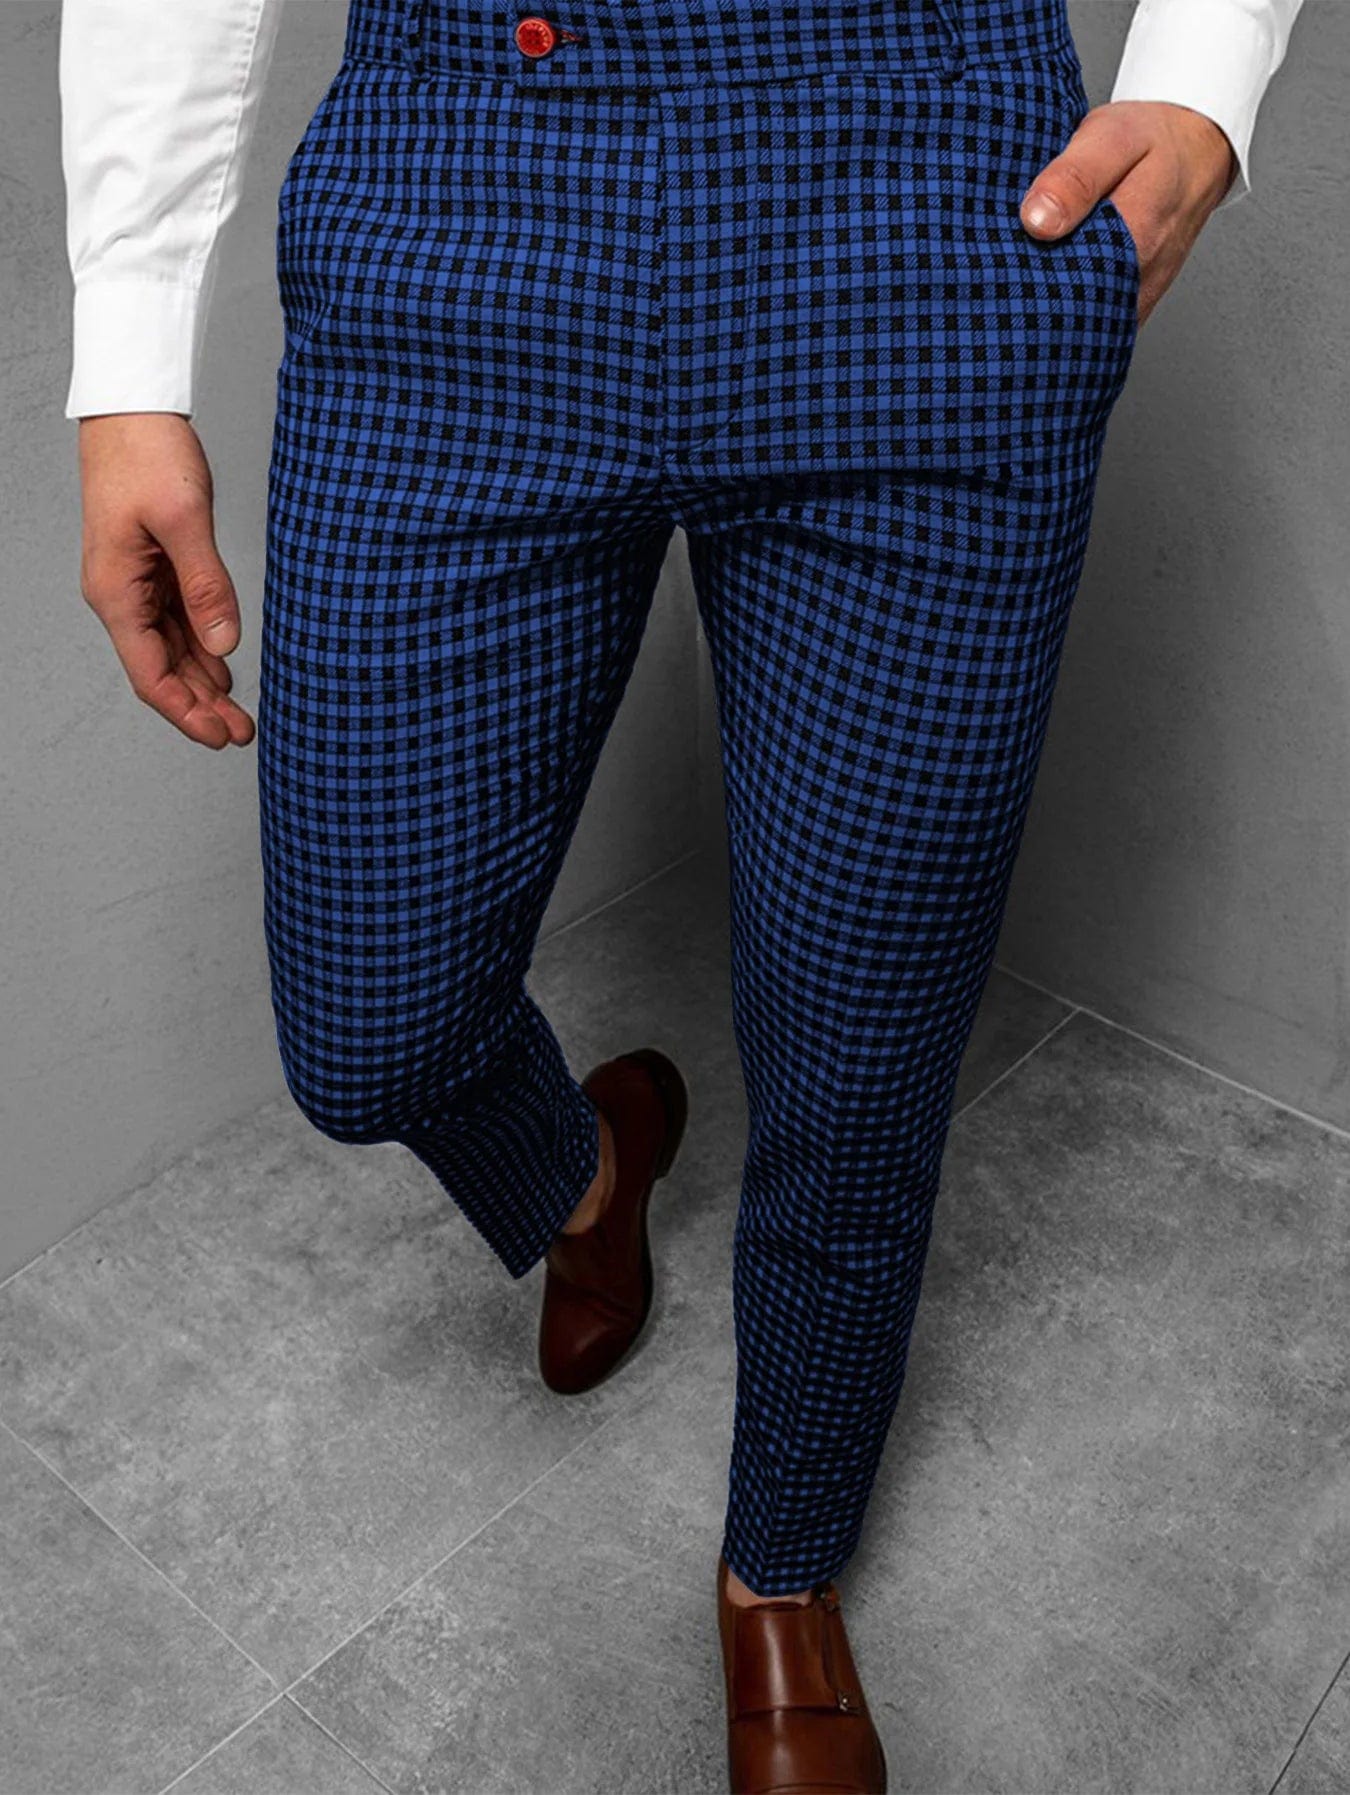 Men Slim Fit Plaid Printed Checkered Pants Stretch Casual Work Business  Trousers